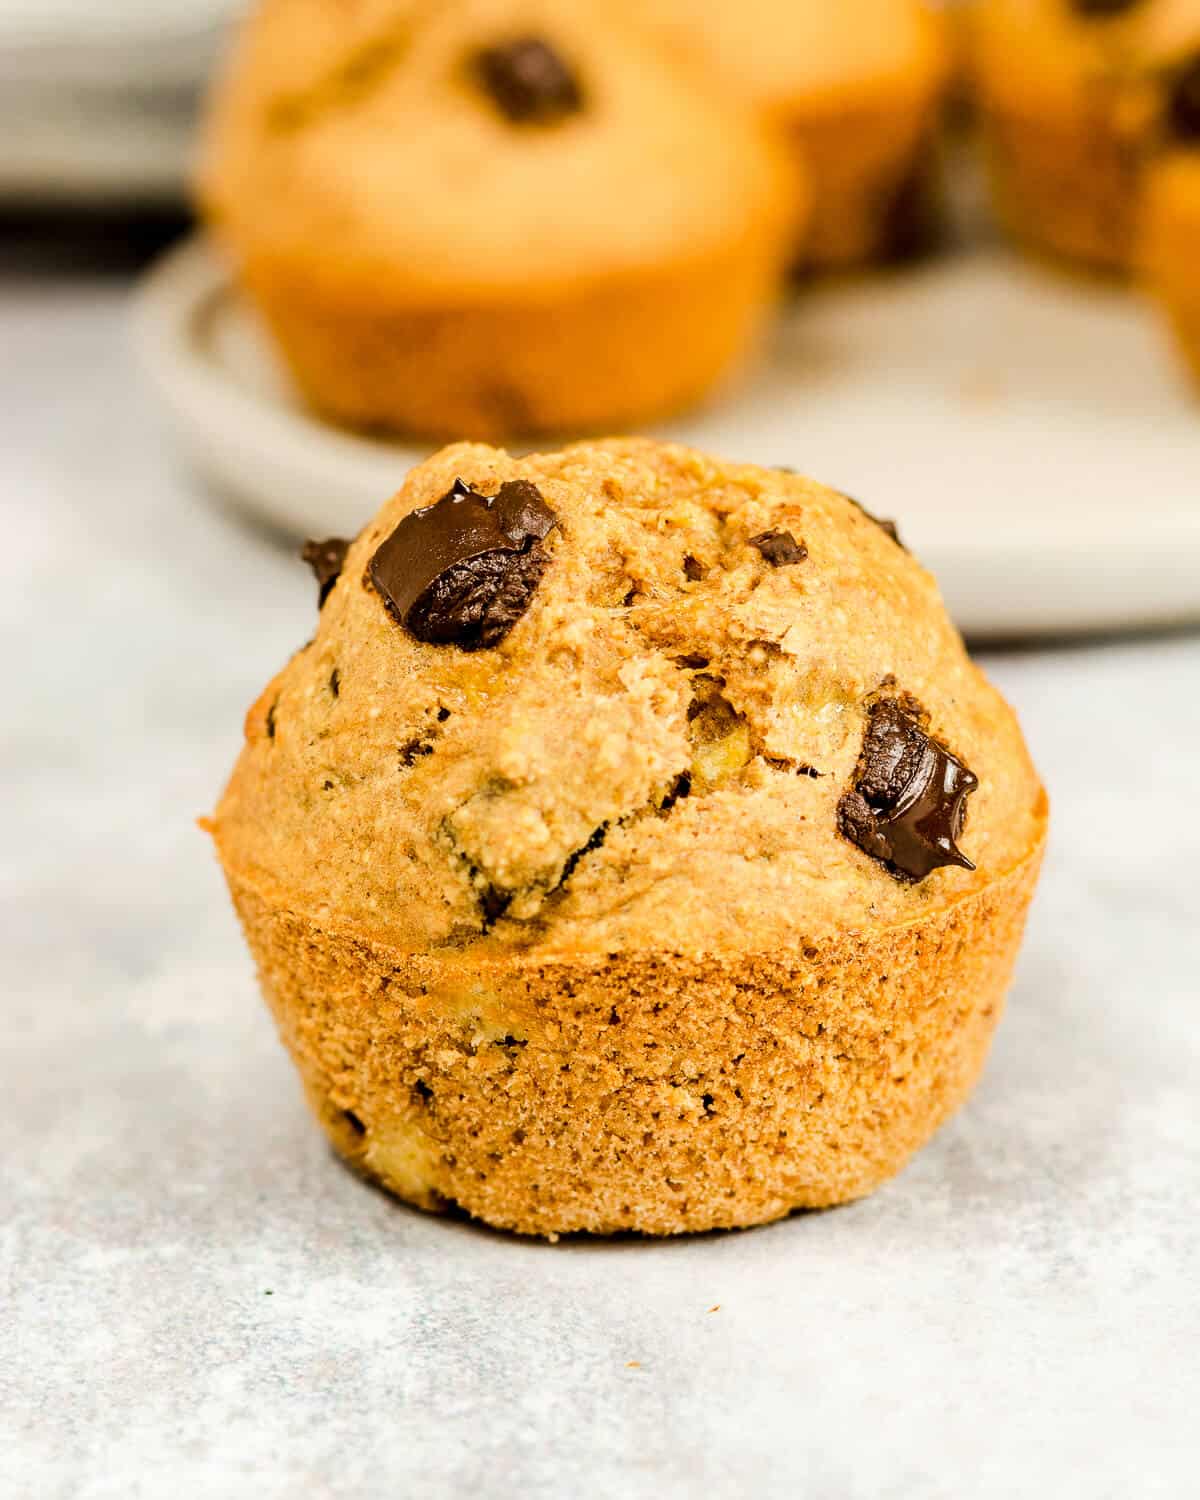 A banana muffin with chocolate chips, there are more muffins on a plate in the background.